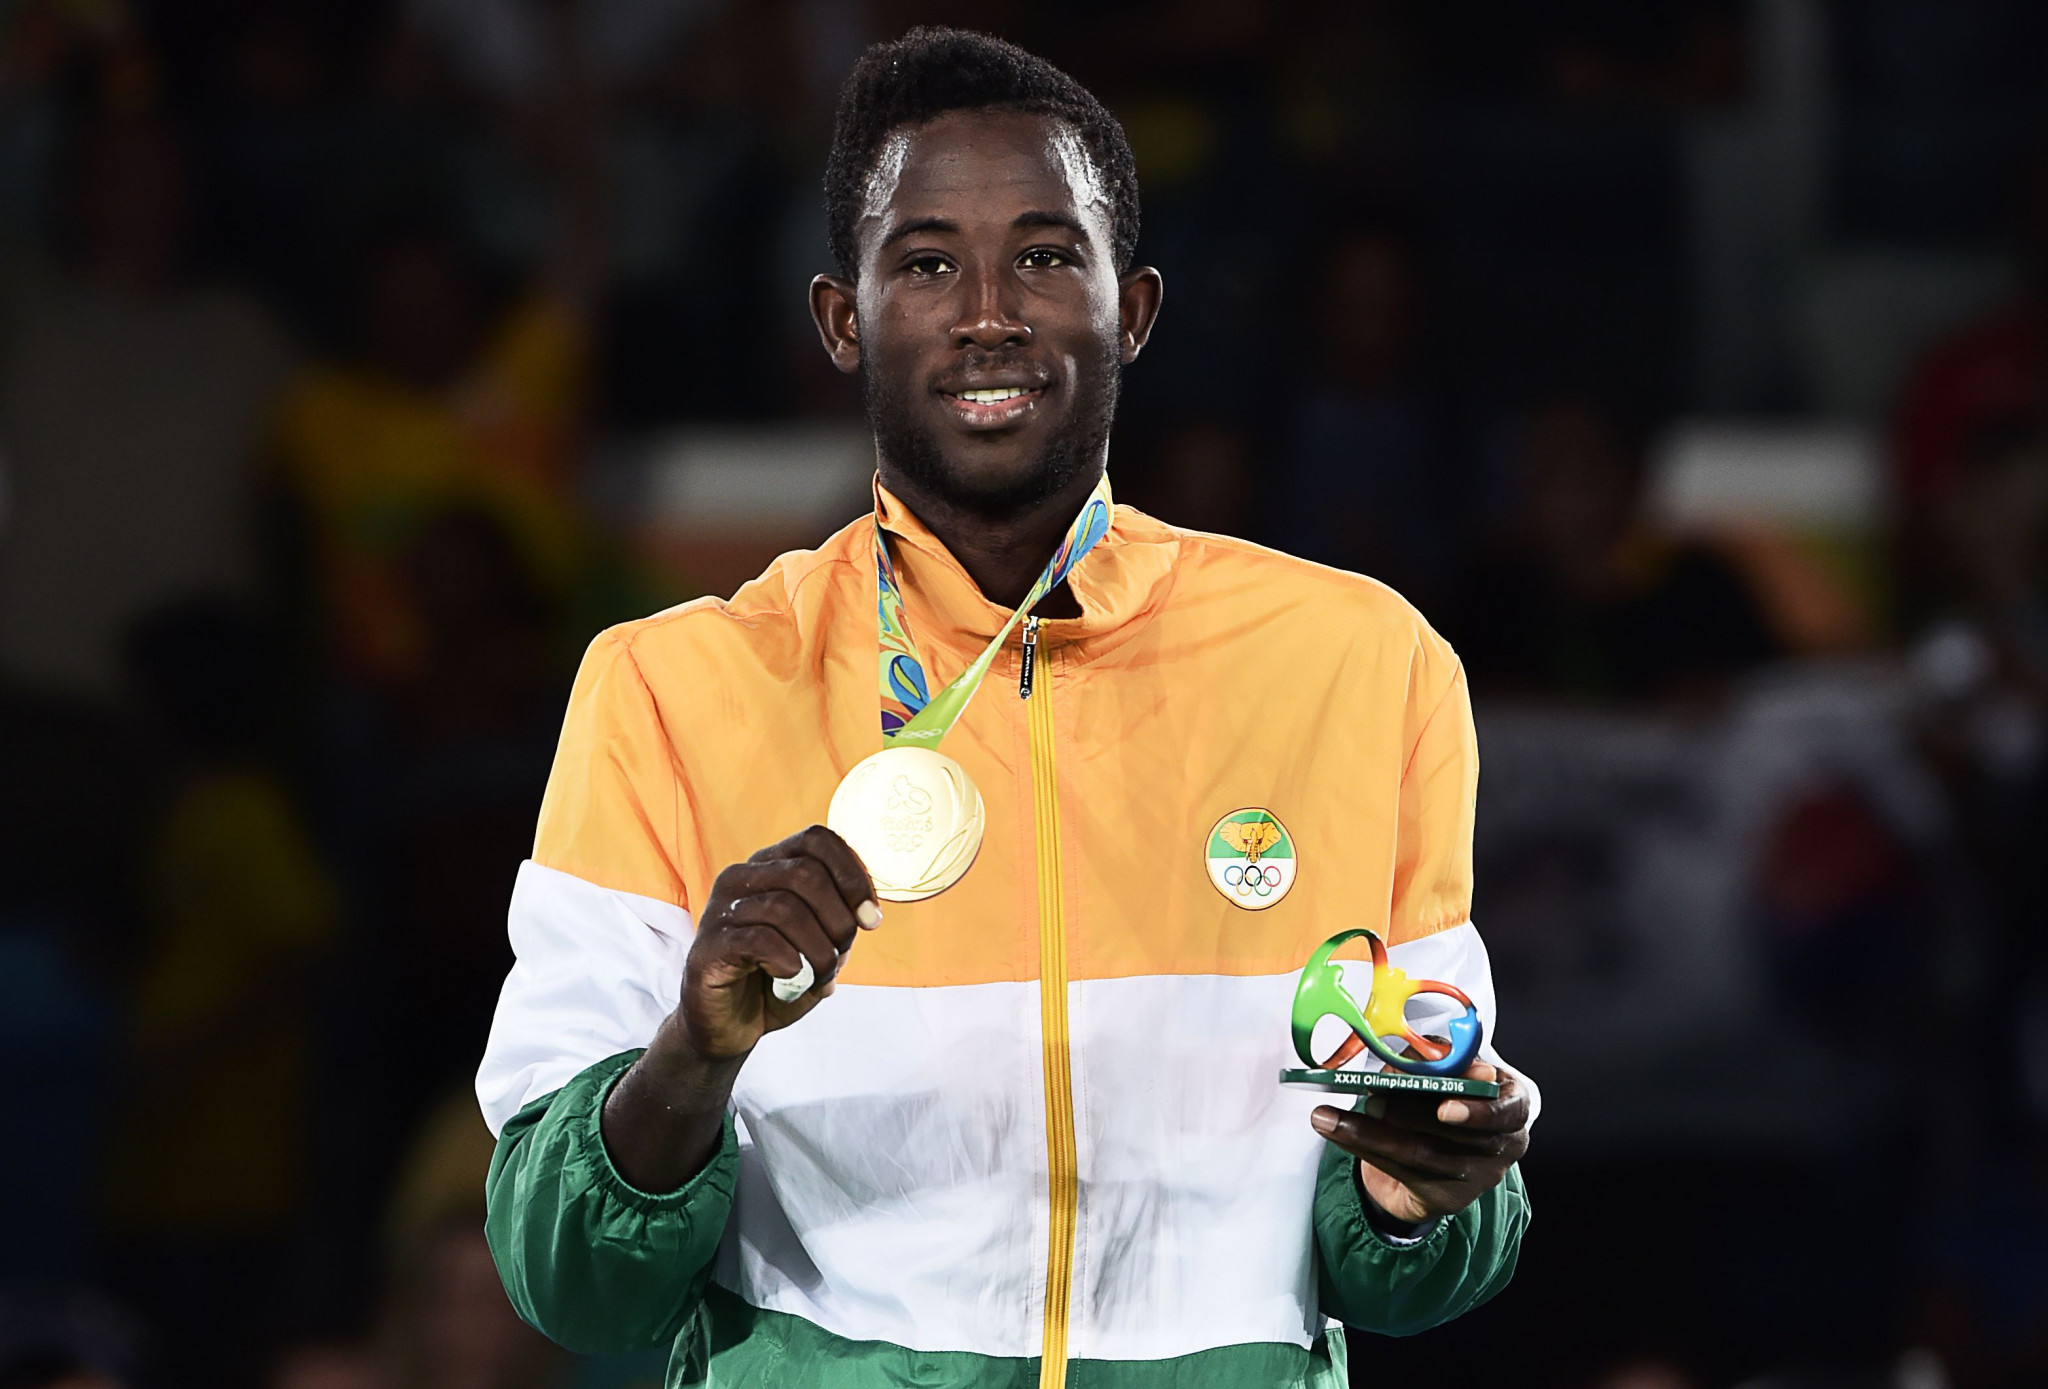 Cheick Sallah Cisse won Ivory Coast's first Olympic gold medal at Rio 2016 ©Getty Images